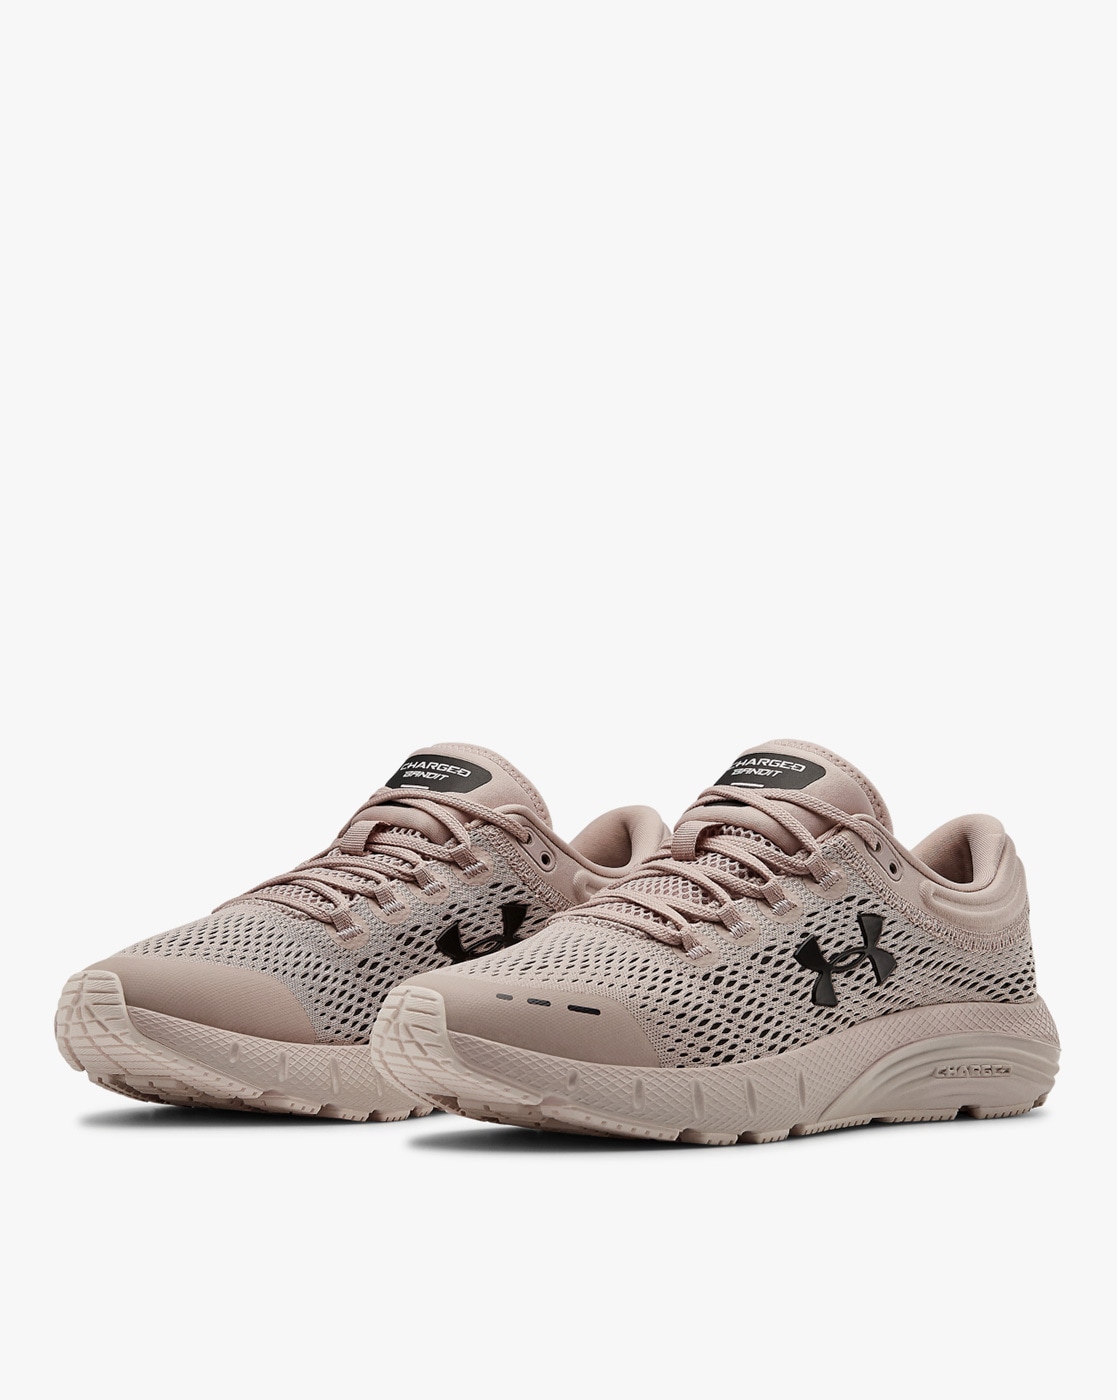 Buy Pink Sports Shoes for Women by Under Armour Online